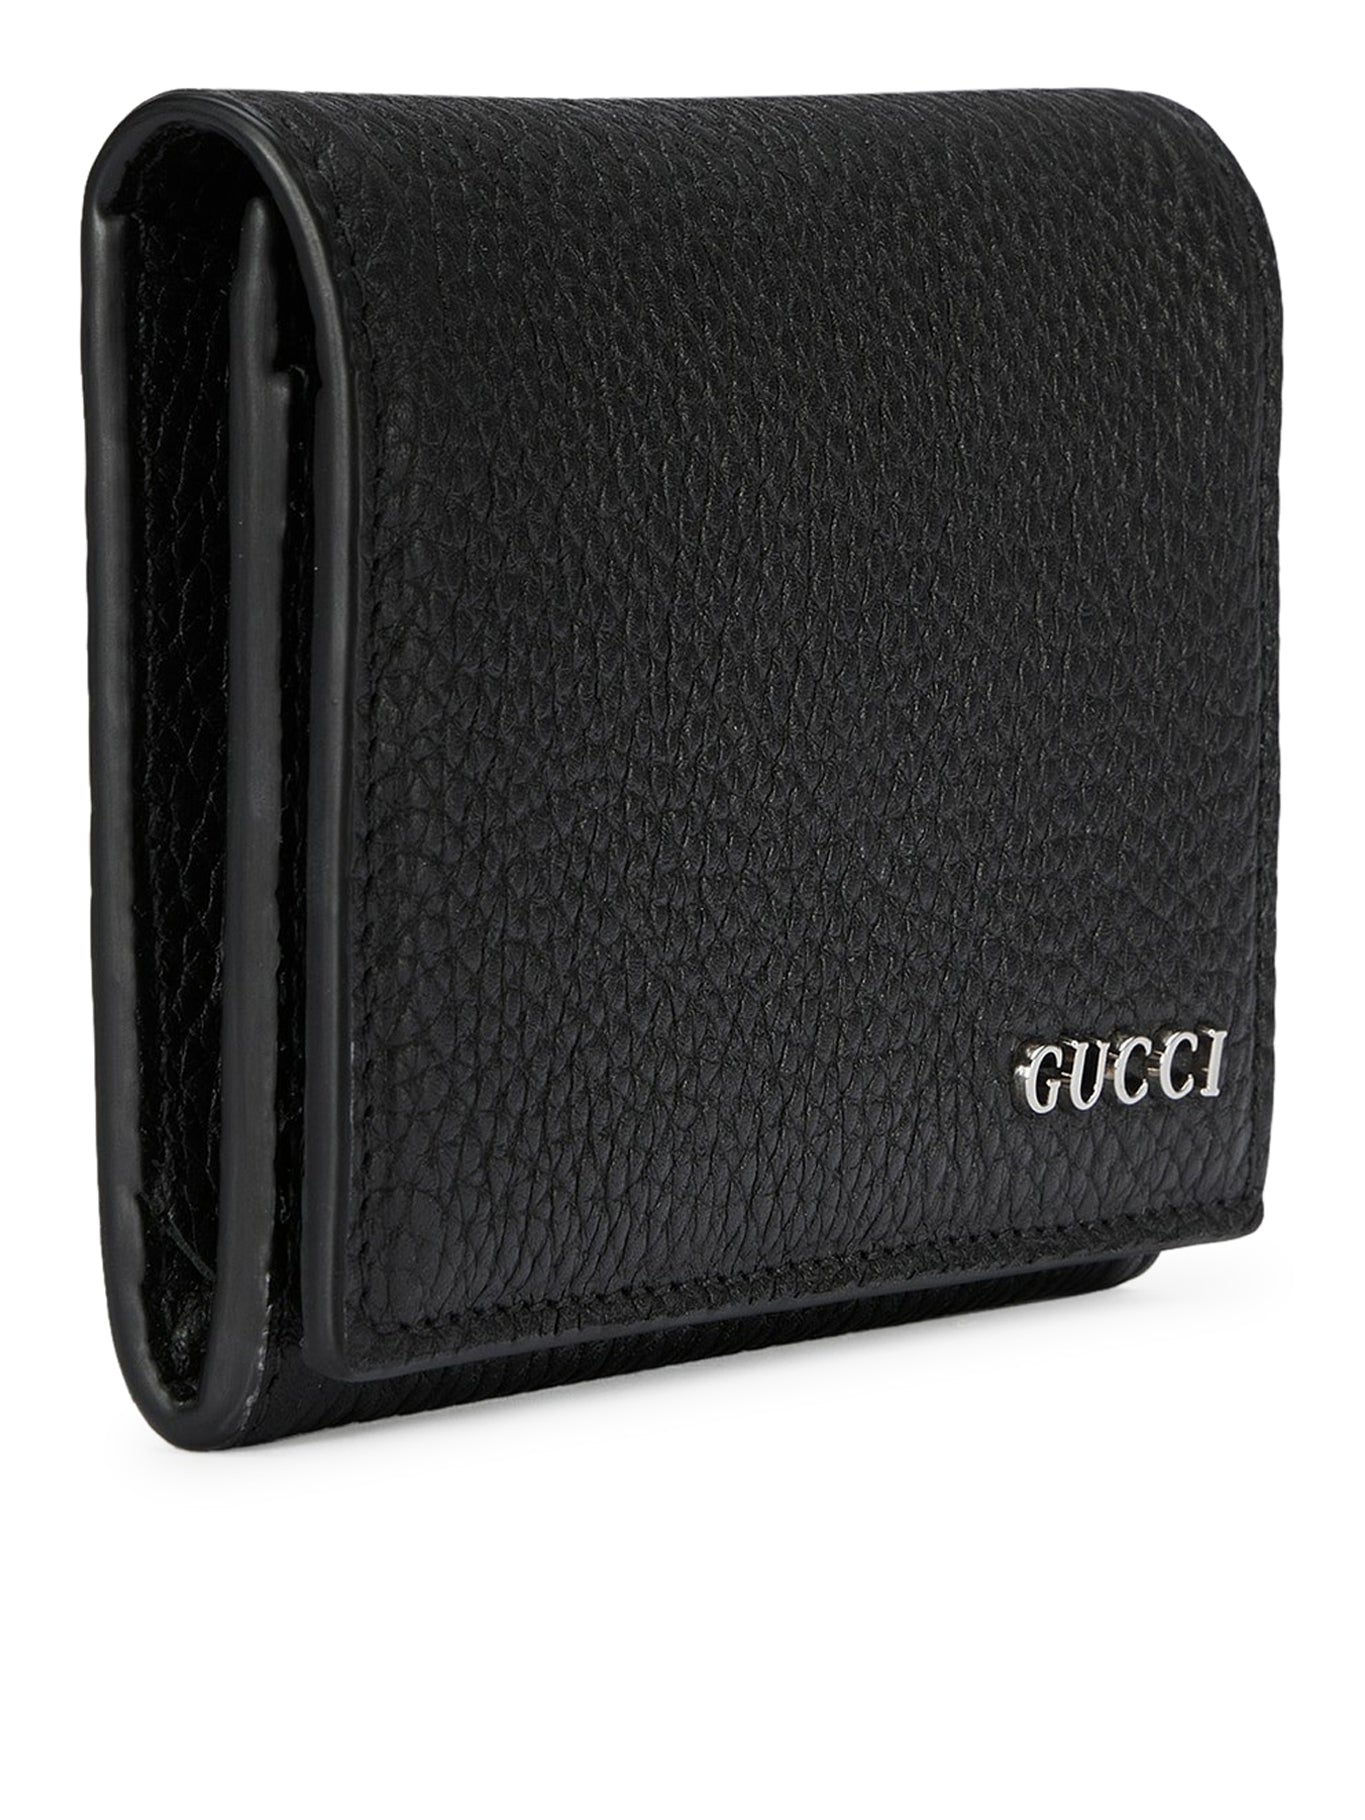 LONG CARD HOLDER WITH GUCCI LOGO